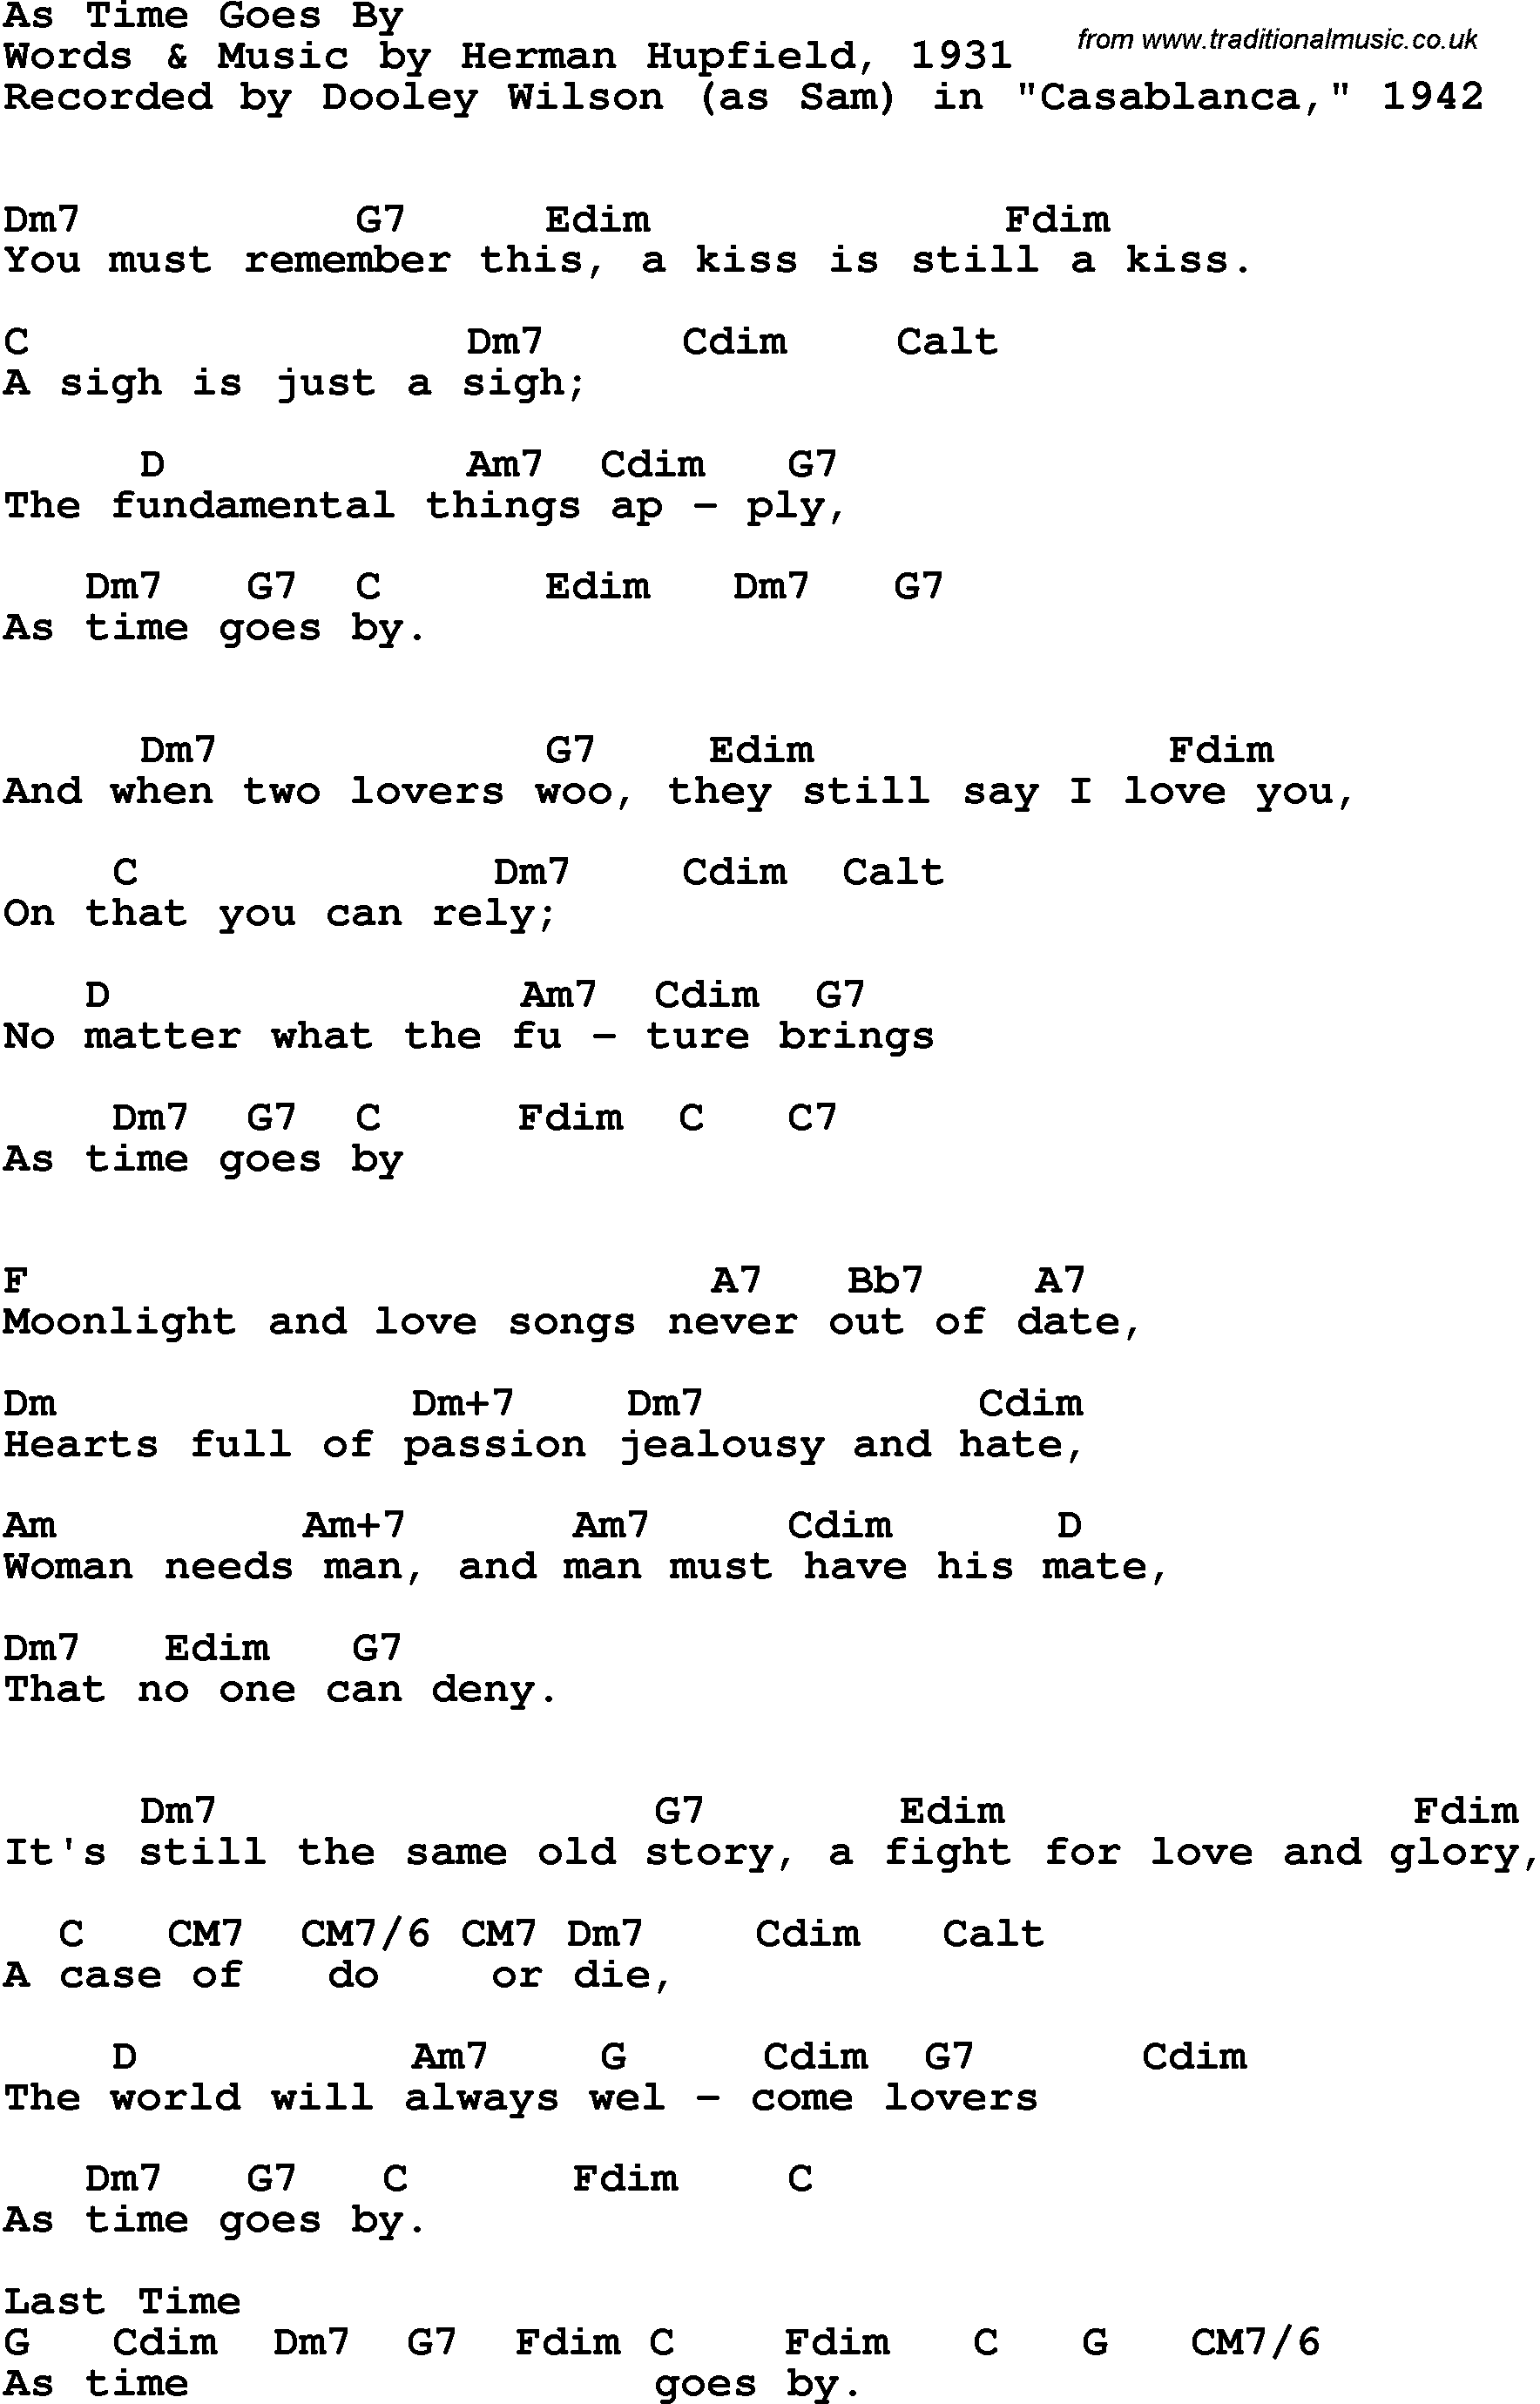 Song Lyrics with guitar chords for As Time Goes By  - Dooley Wilson As Sam In The Movie Casablanca, 1942